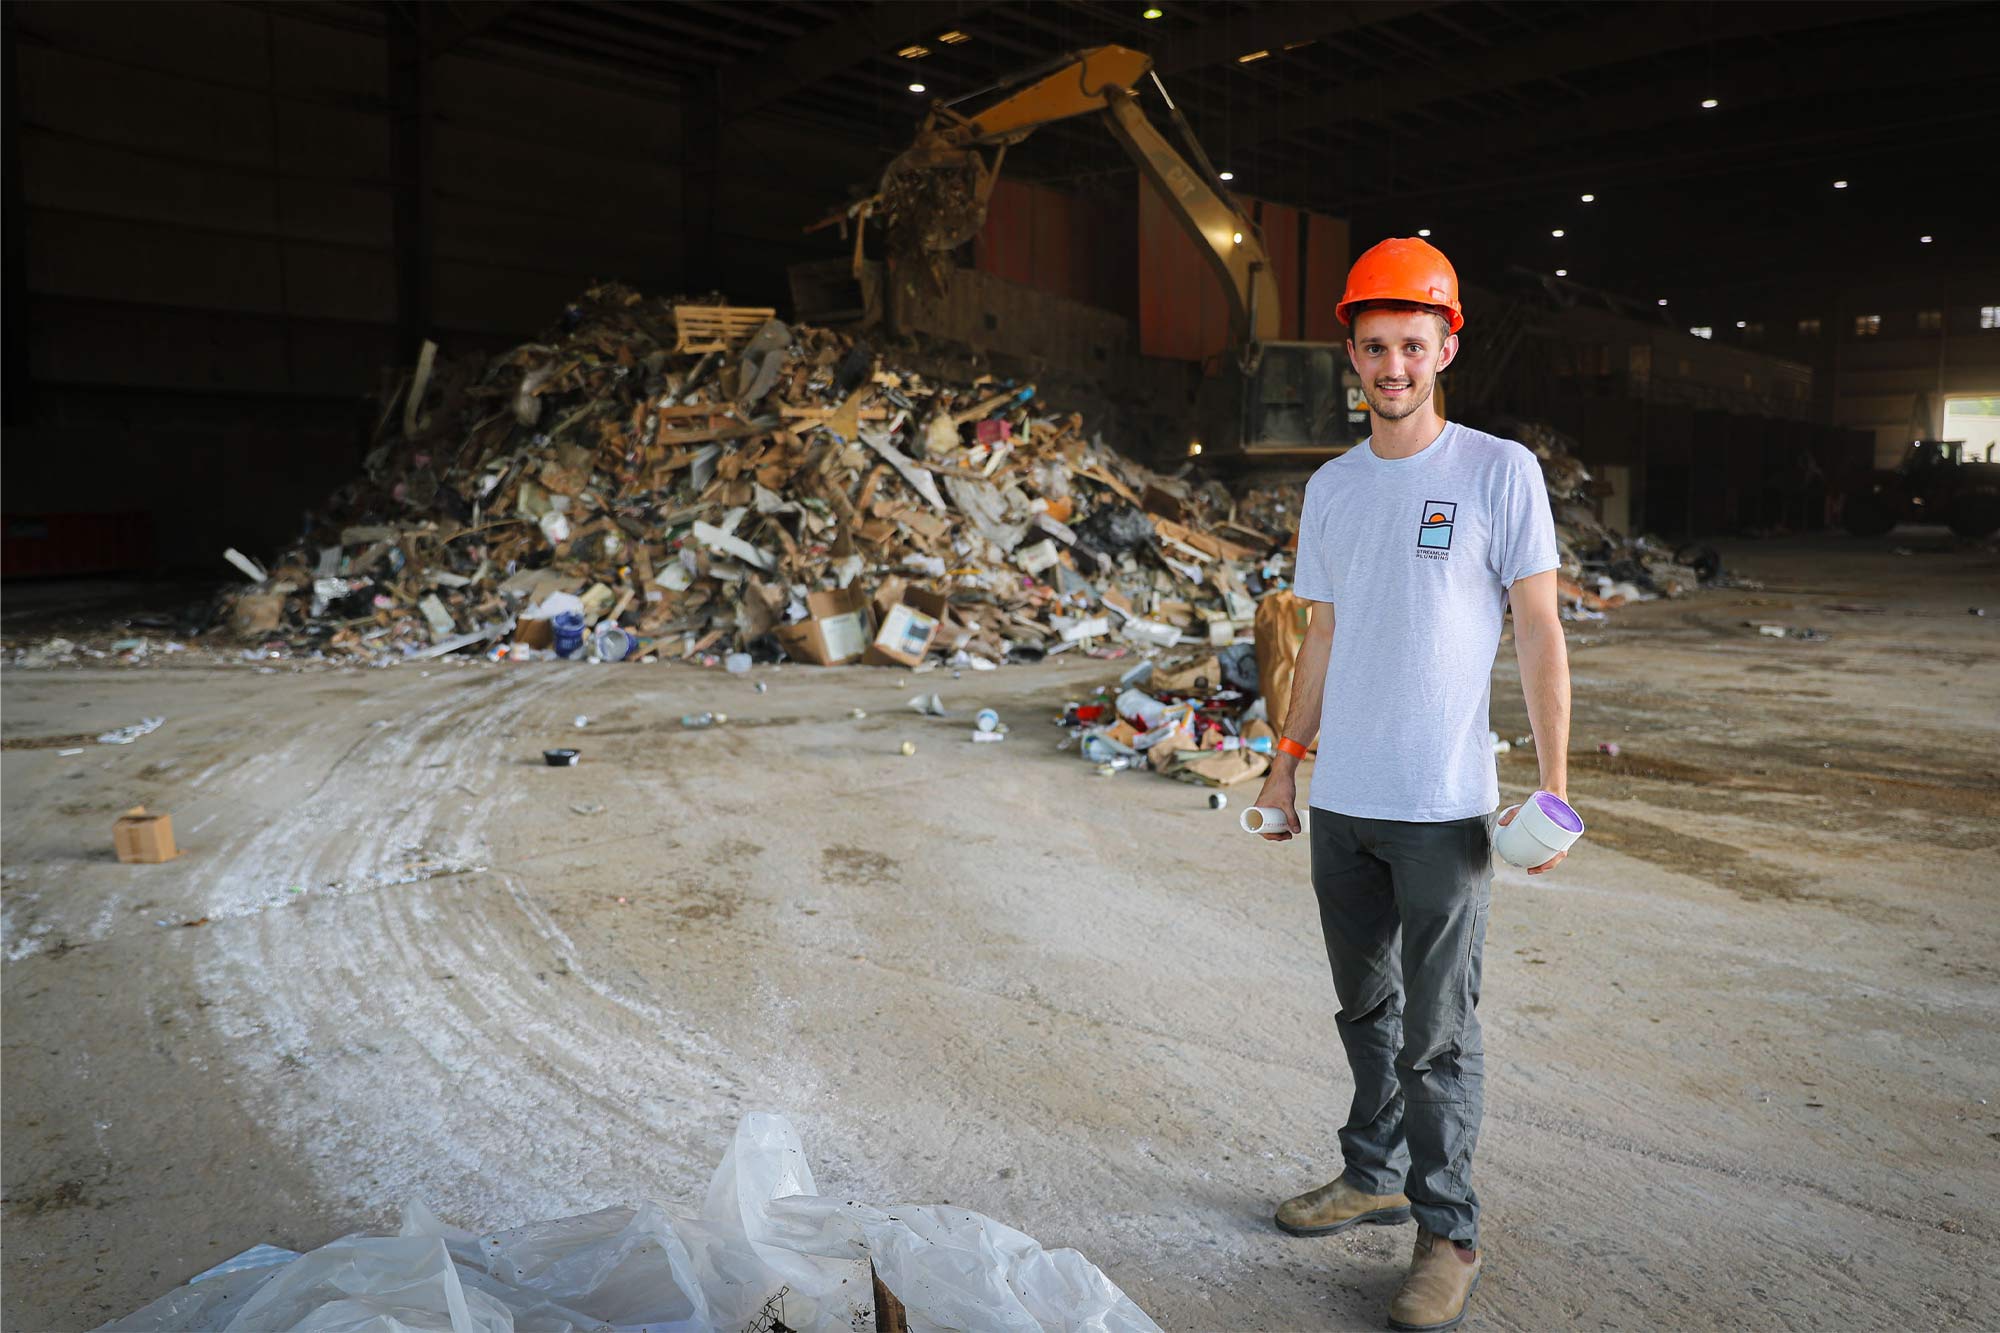 Levi Otis wears an orange hard hat and stands in front of a pile of refuse